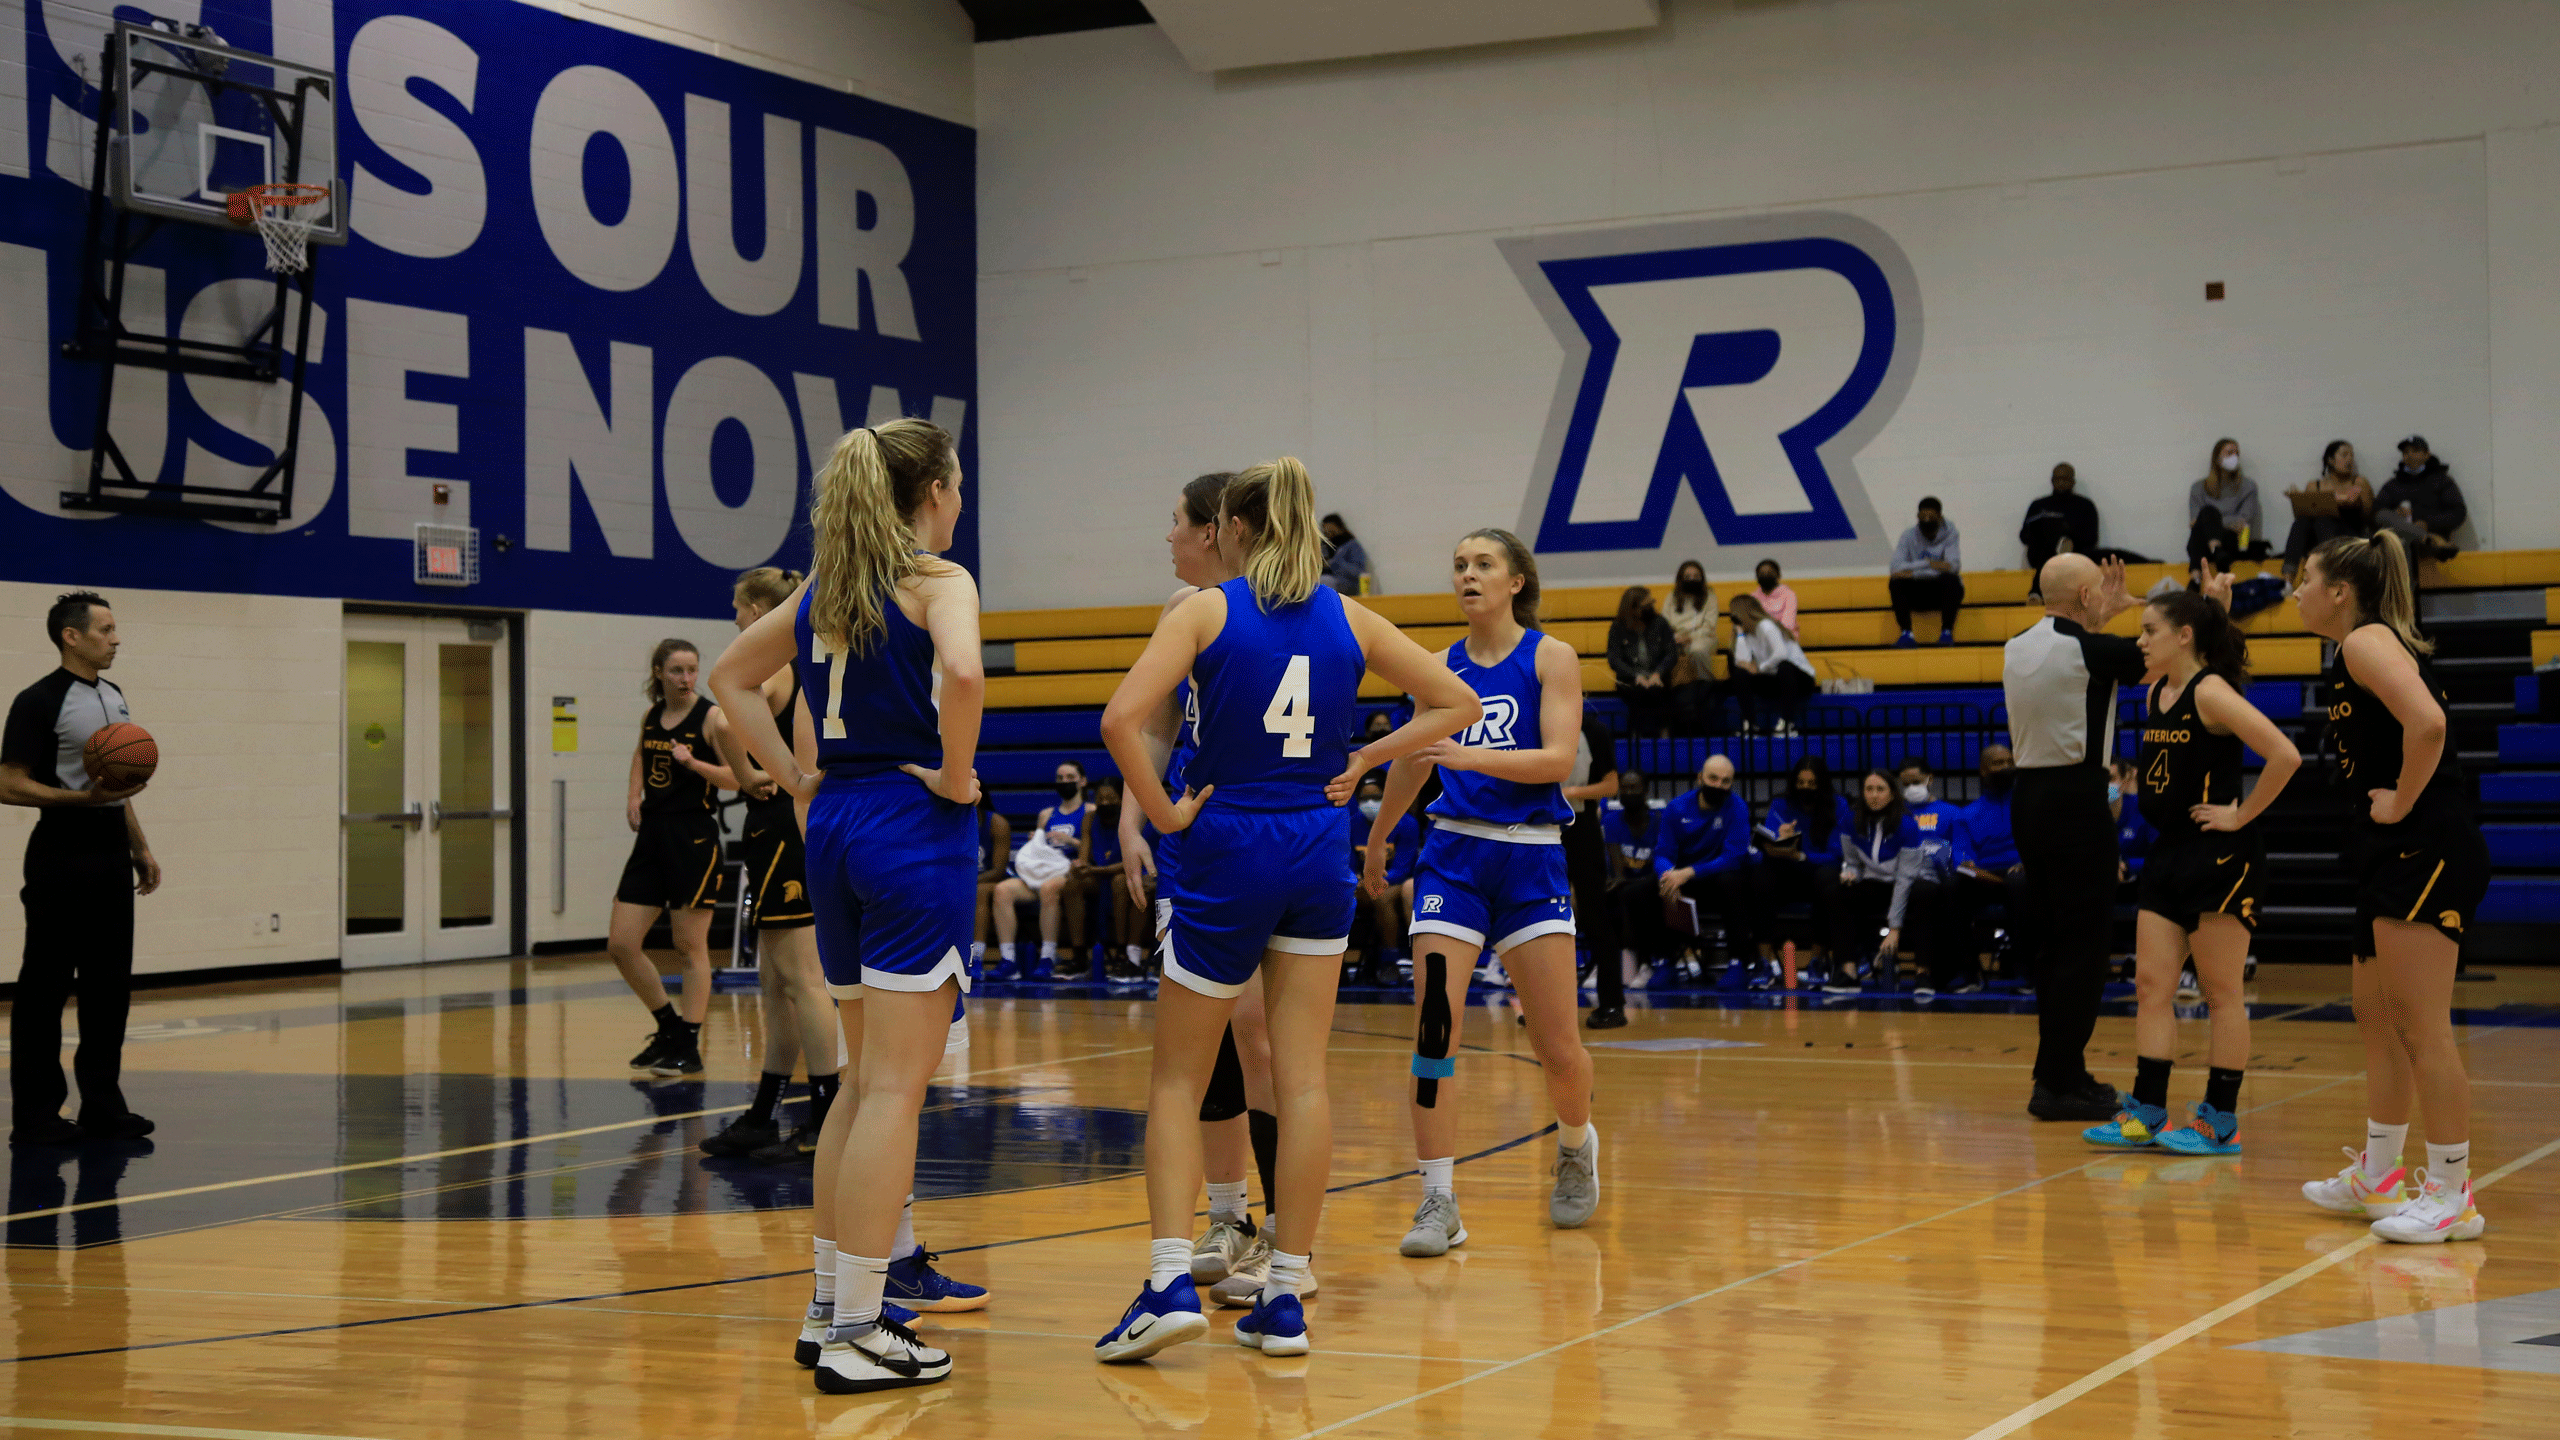 The Rams women's basketball team, in blue jerseys, have a discussion during a break in play